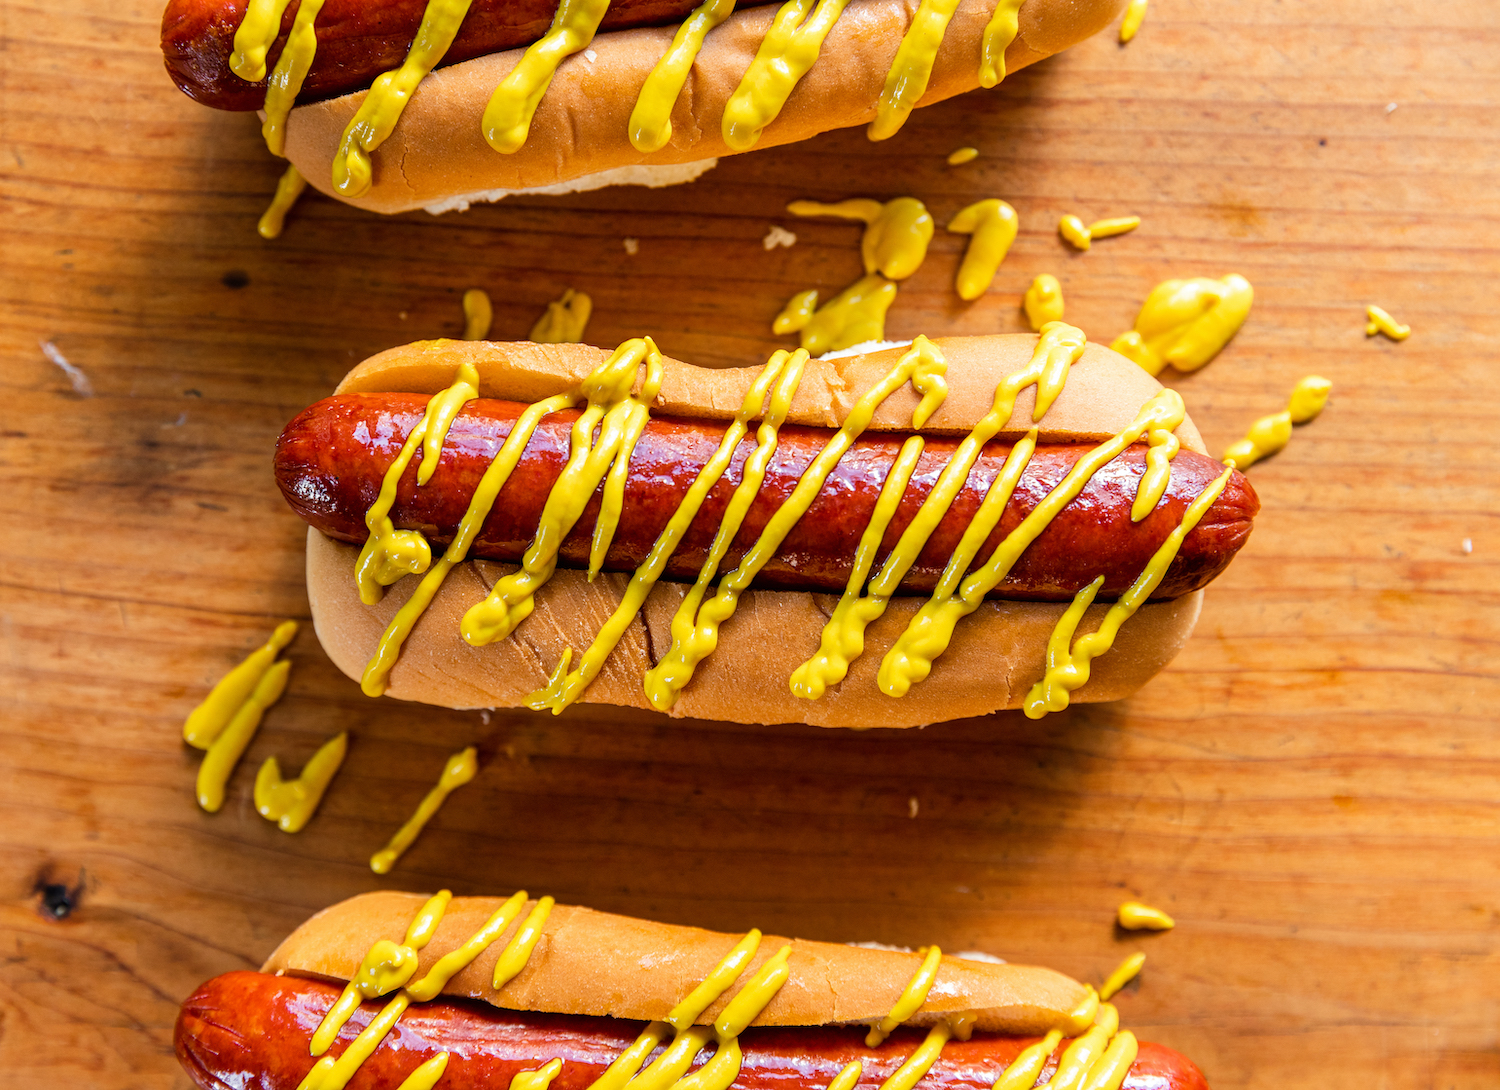 Dry-aged hot dogs.